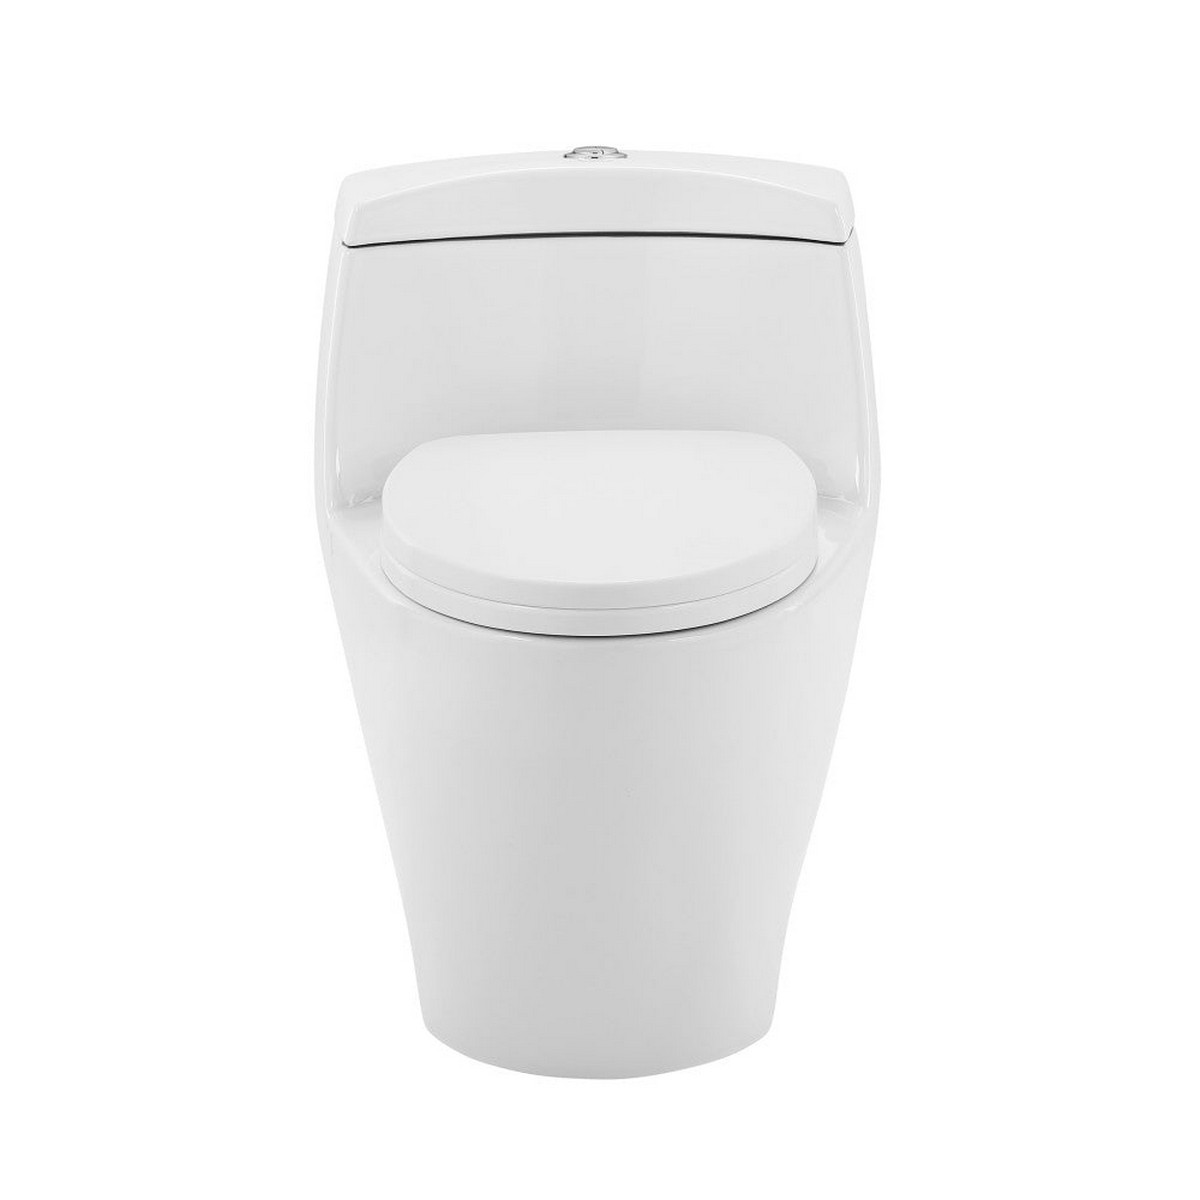 SWISS MADISON CT-1T203 MANOIR 1.1/1.6 GPF DUAL FLUSH ONE-PIECE ELONGATED TOILET IN GLOSSY WHITE